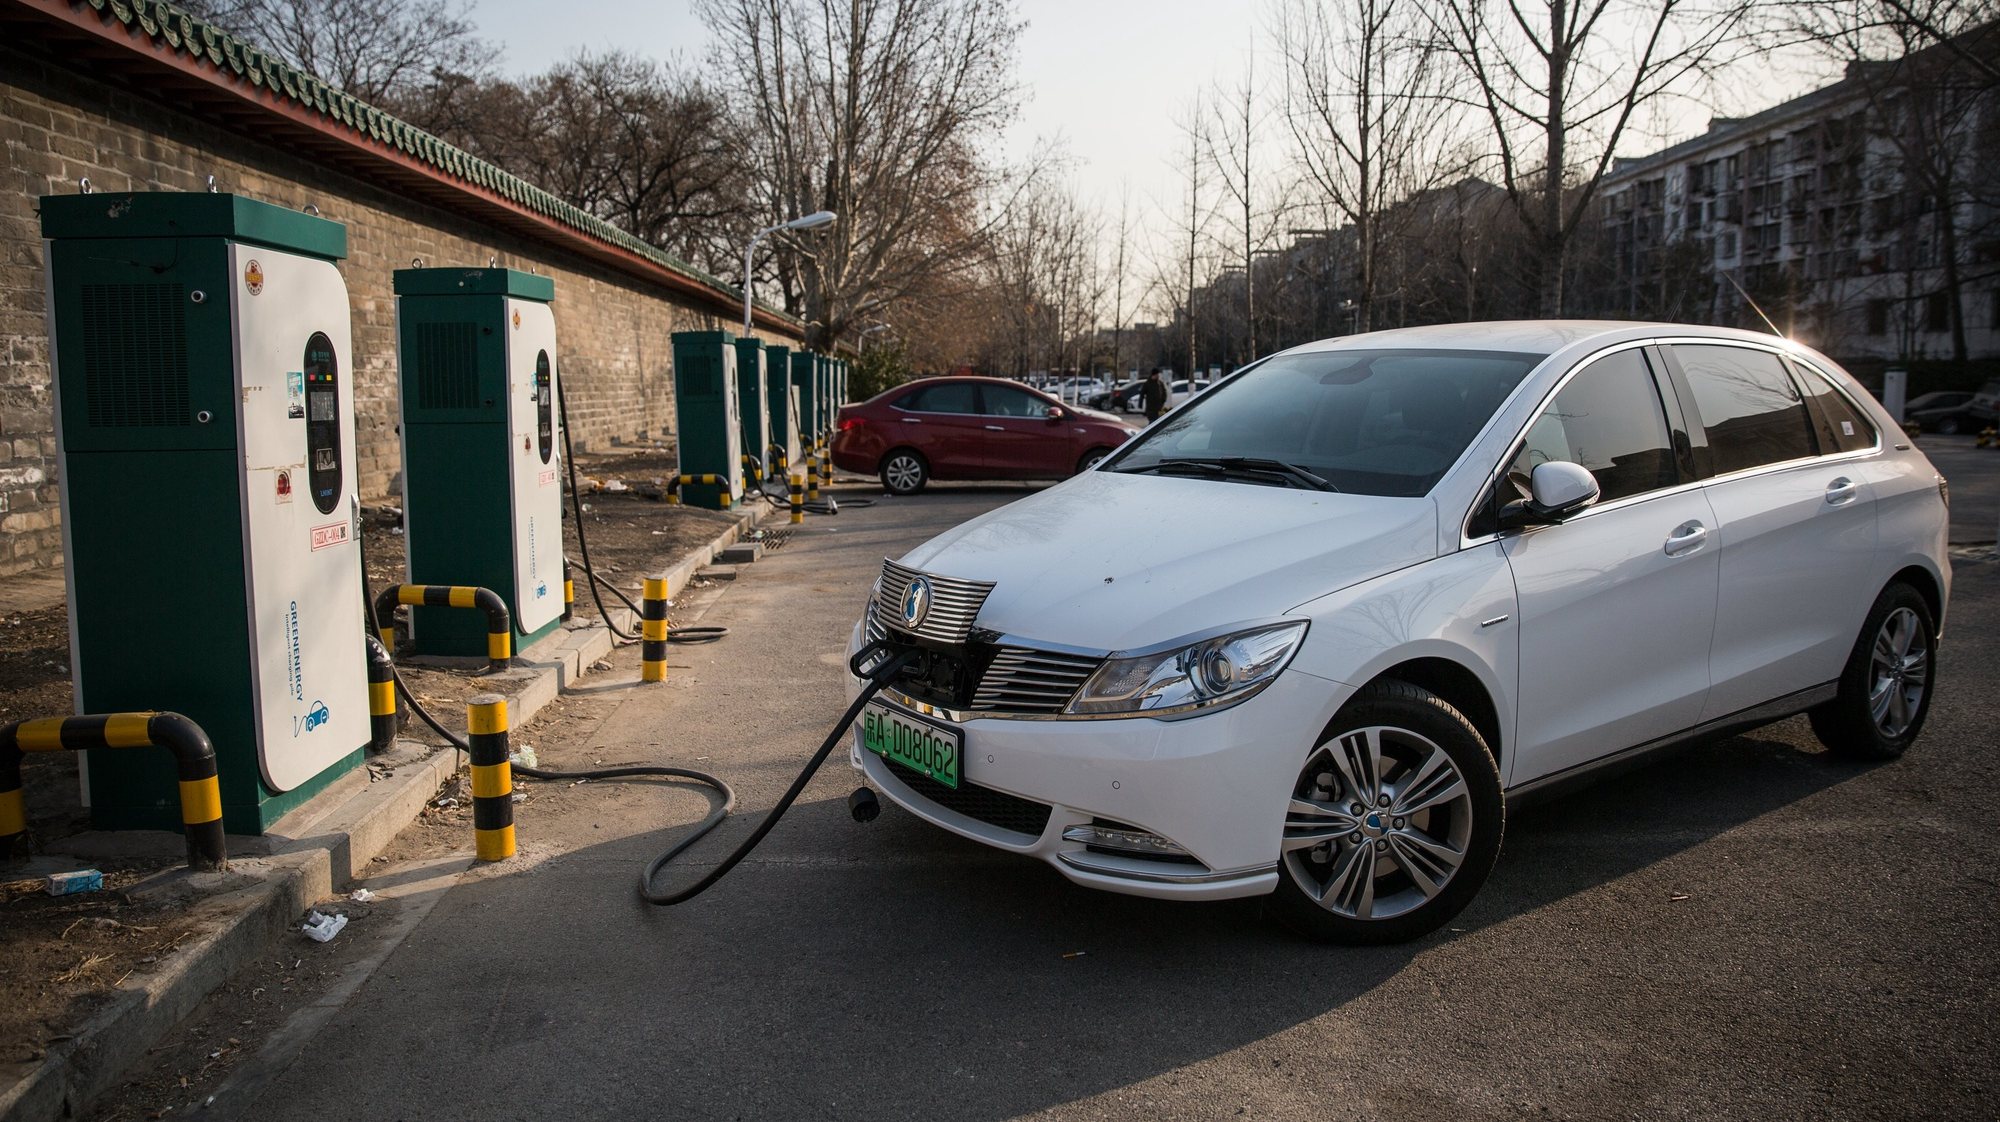 epa06474549 An electric car with an exclusive license plate is charged at an electric vehicle charging station in Beijing, China, 26 January 2018. Exclusive green license plates for new energy vehicles are planned to be expanded in China in the first half of 2018, following the goal to ban fossil fuel-powered cars in the future while promoting hybrids and electric vehicles.  EPA/ROMAN PILIPEY